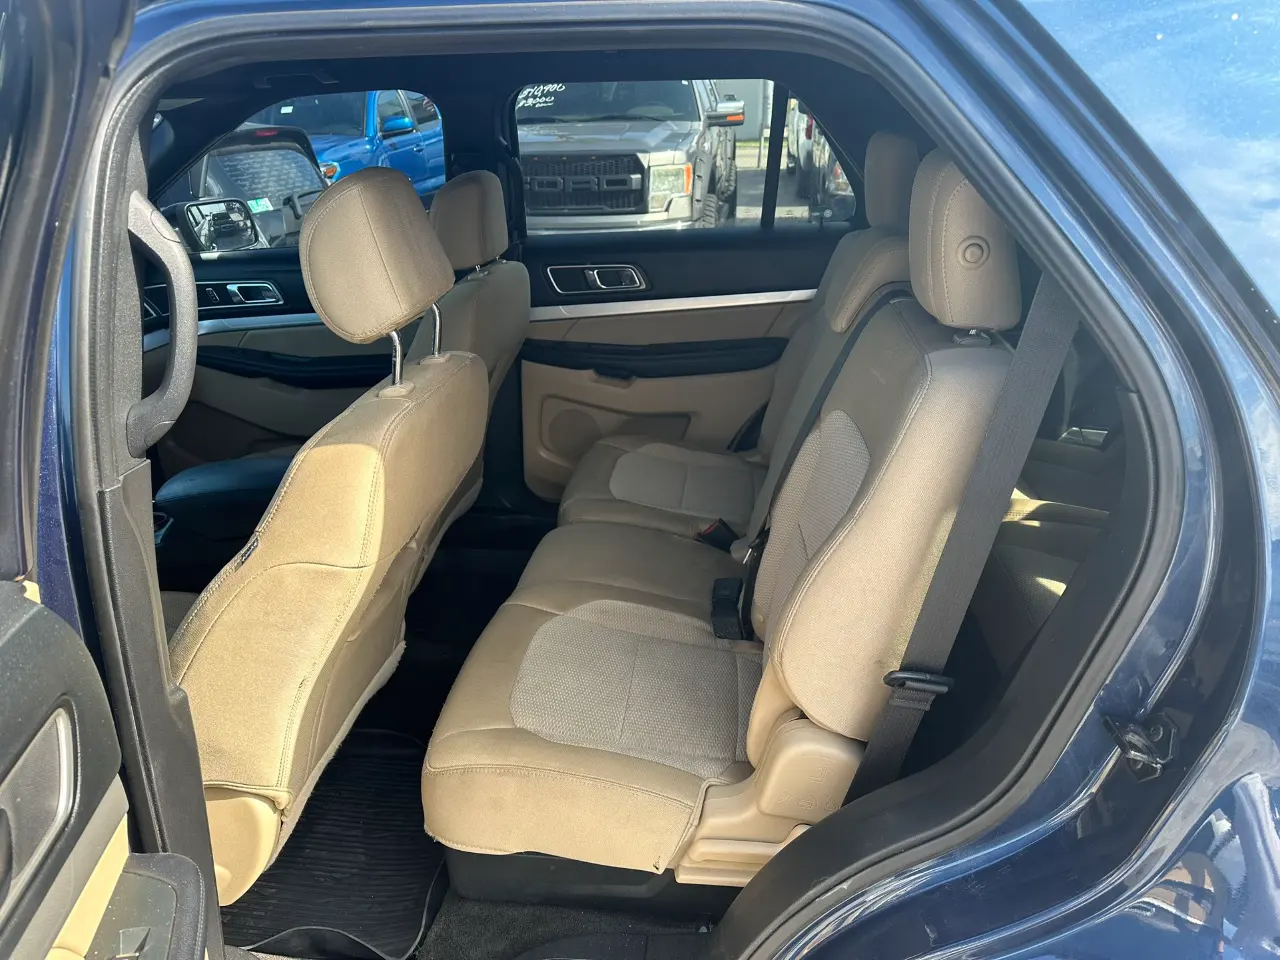 used 2017 Ford Explorer - interior view 1